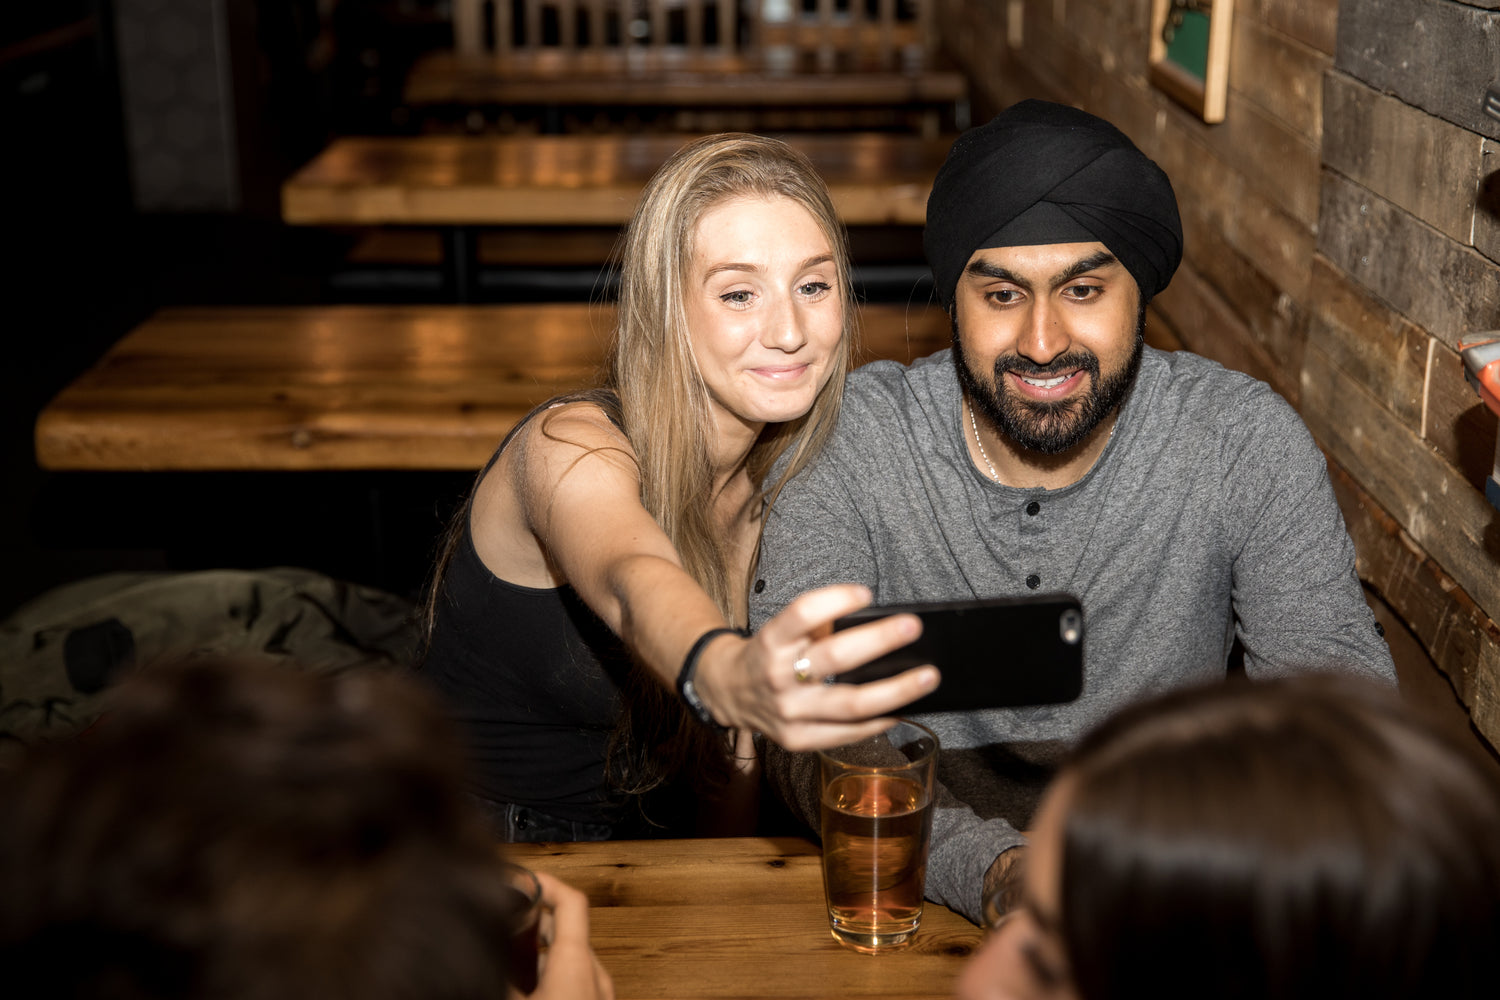 Man and woman taking a selfie at the bar while playing Connectin' Card Game.